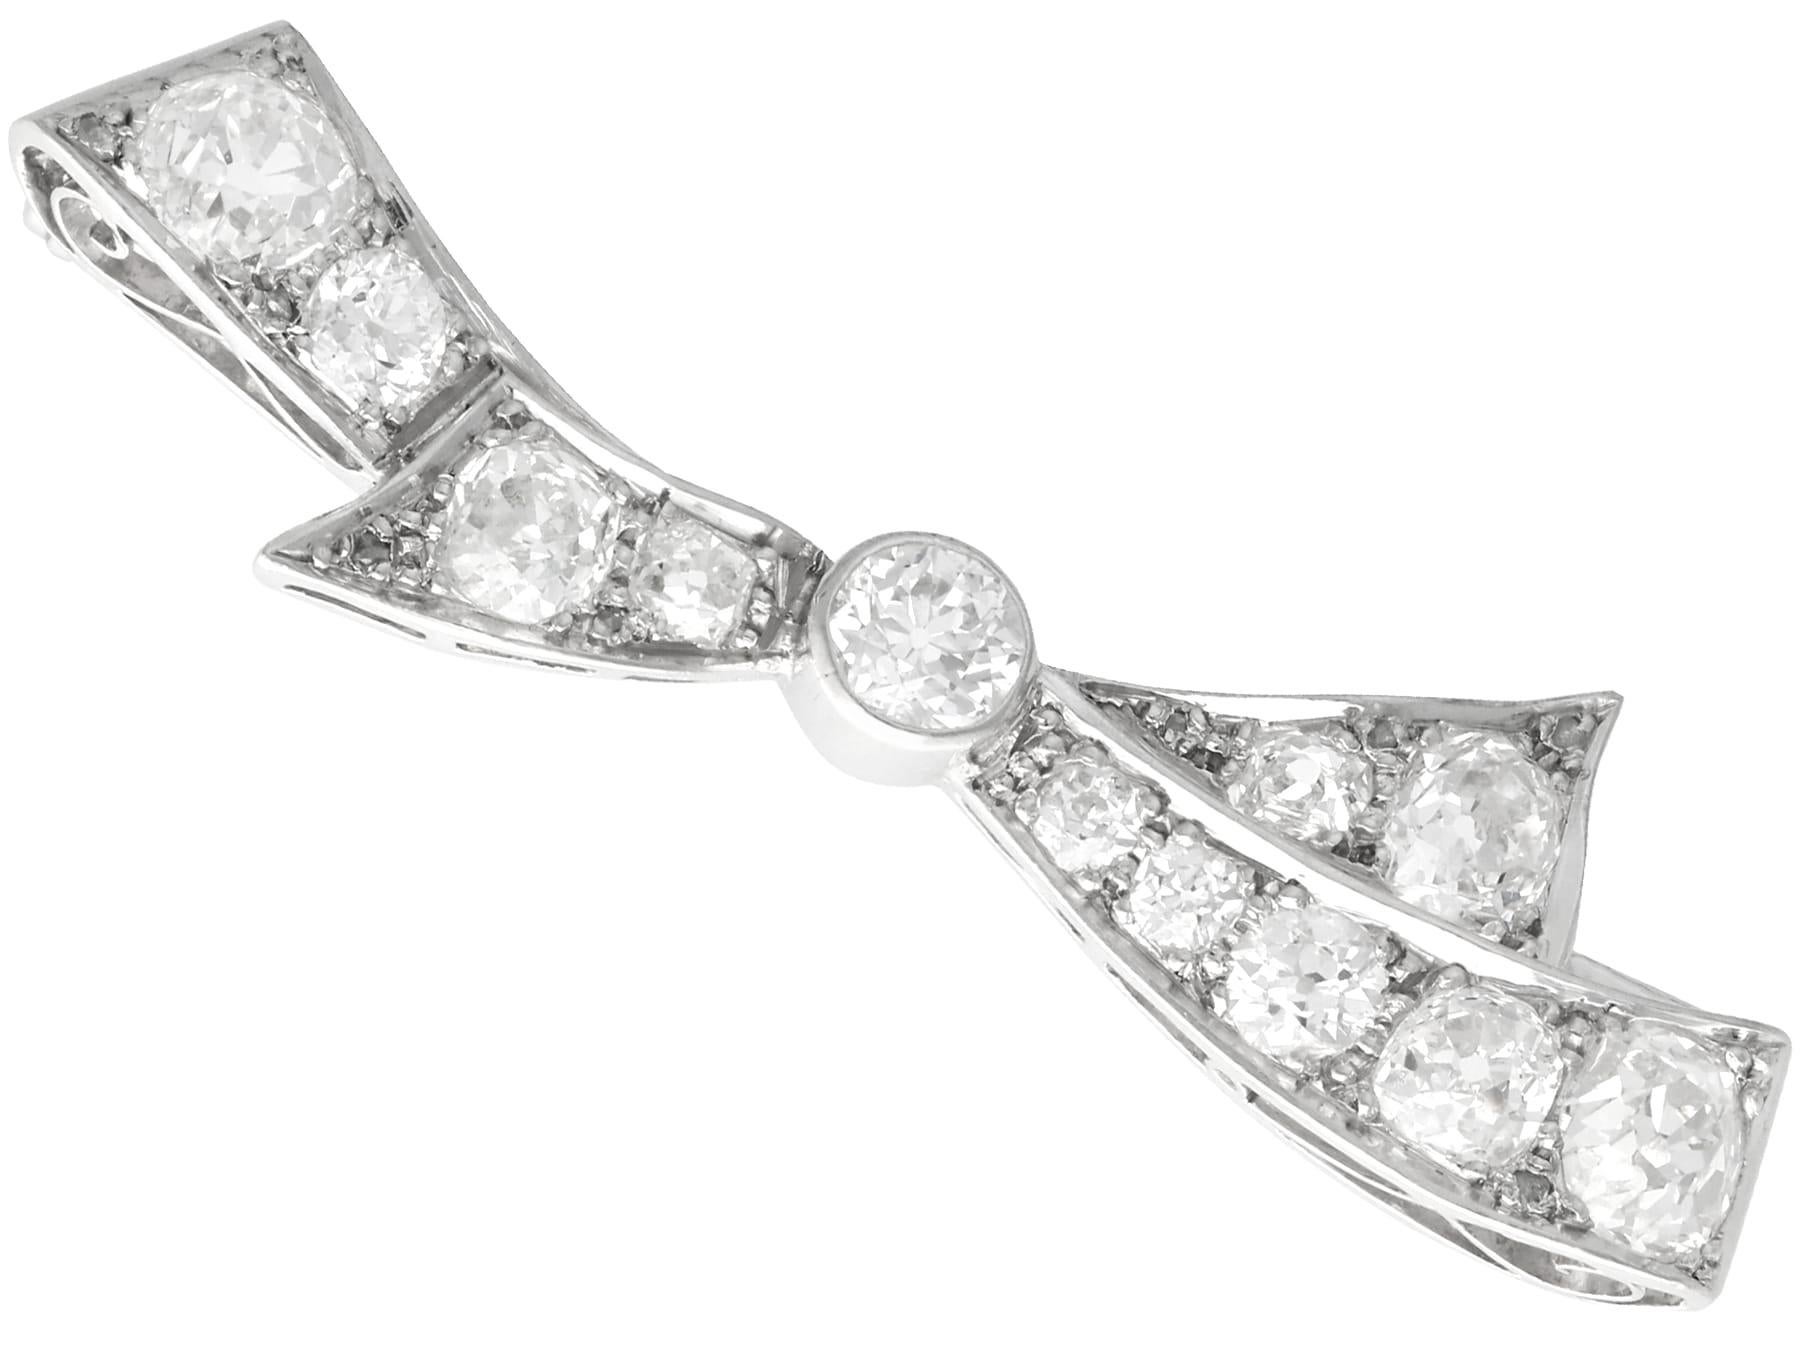 Antique 4.45ct Diamond and Platinum Bow Brooch In Excellent Condition For Sale In Jesmond, Newcastle Upon Tyne